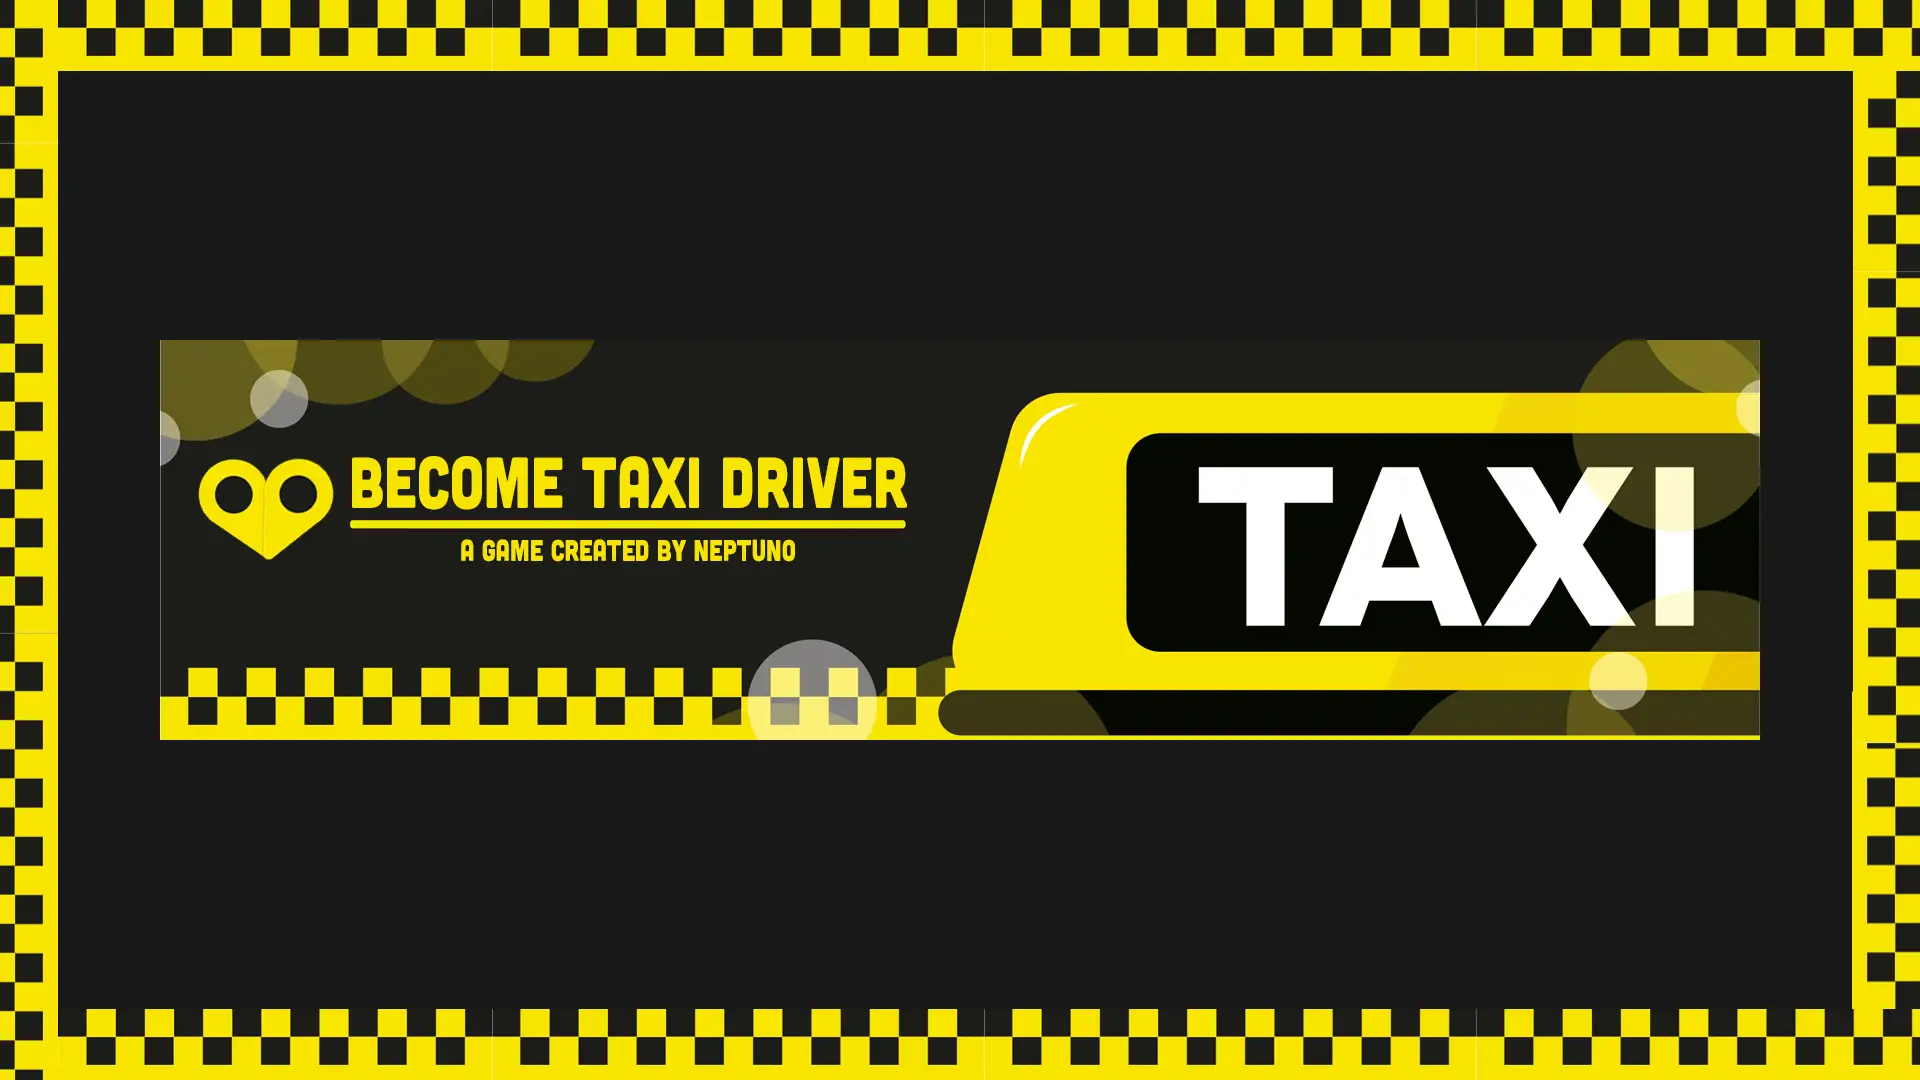 Yellow Taxi Cab Sex - HTML] Become Taxi Driver - v0.36 by Neptuno 18+ Adult xxx Porn Game Download